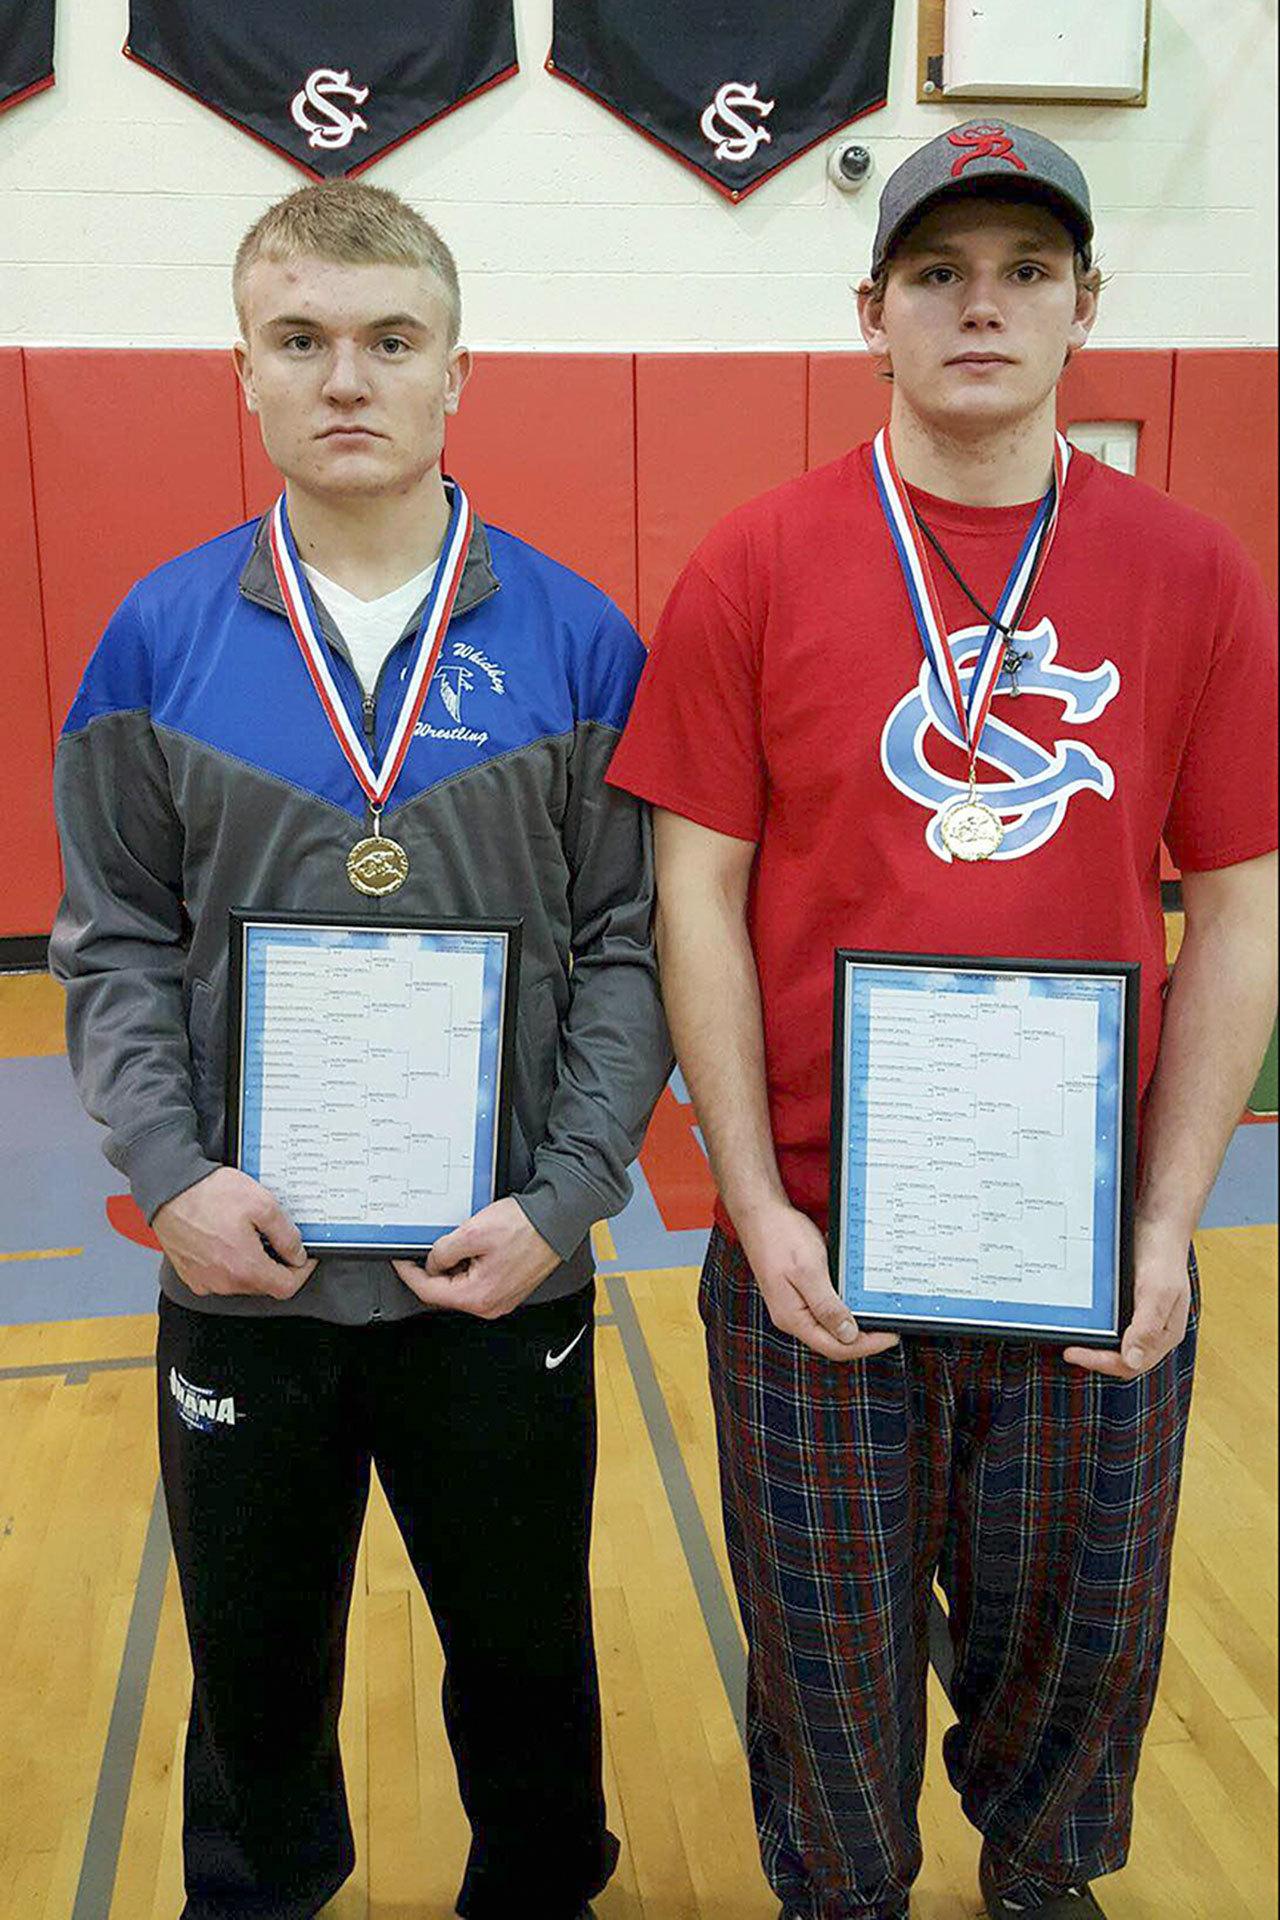 Jim Thompson photo                                South Whidbey wrestlers Hunter Newman (left) and Logan Madsen (right) won the 145 and 195-pound brackets at the Return of the Seahawk tournament on Dec. 3.